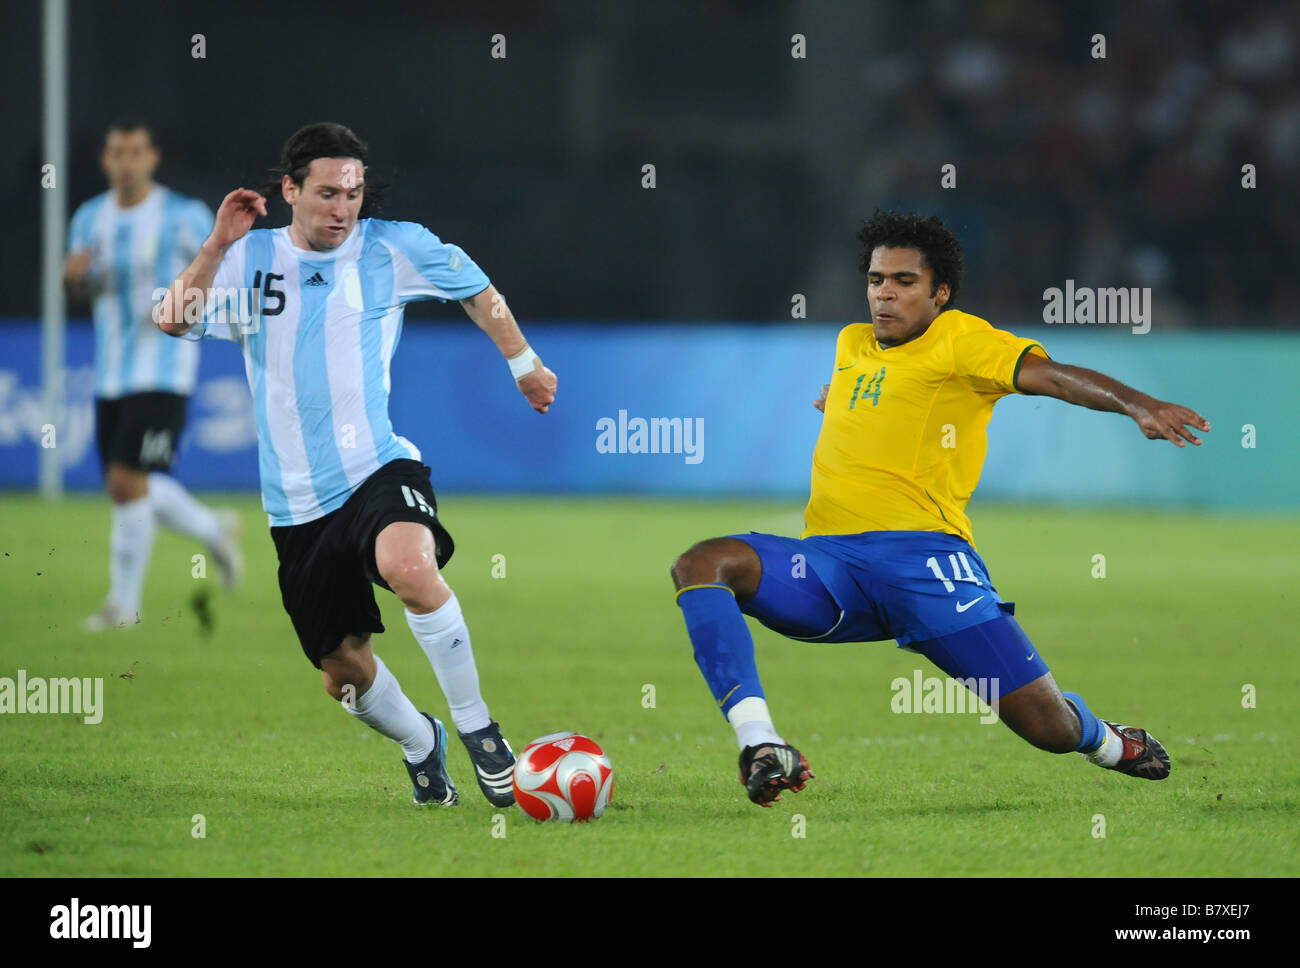 Lionel Messi ARG Breno BRA AUGUST 19 2008 Football Beijing 2008 Olympic Games Mens Football semi final match between Argentina and Brazil at Workers Stadium in Beijing China Photo by Atsushi Tomura AFLO SPORT 1035 Stock Photo